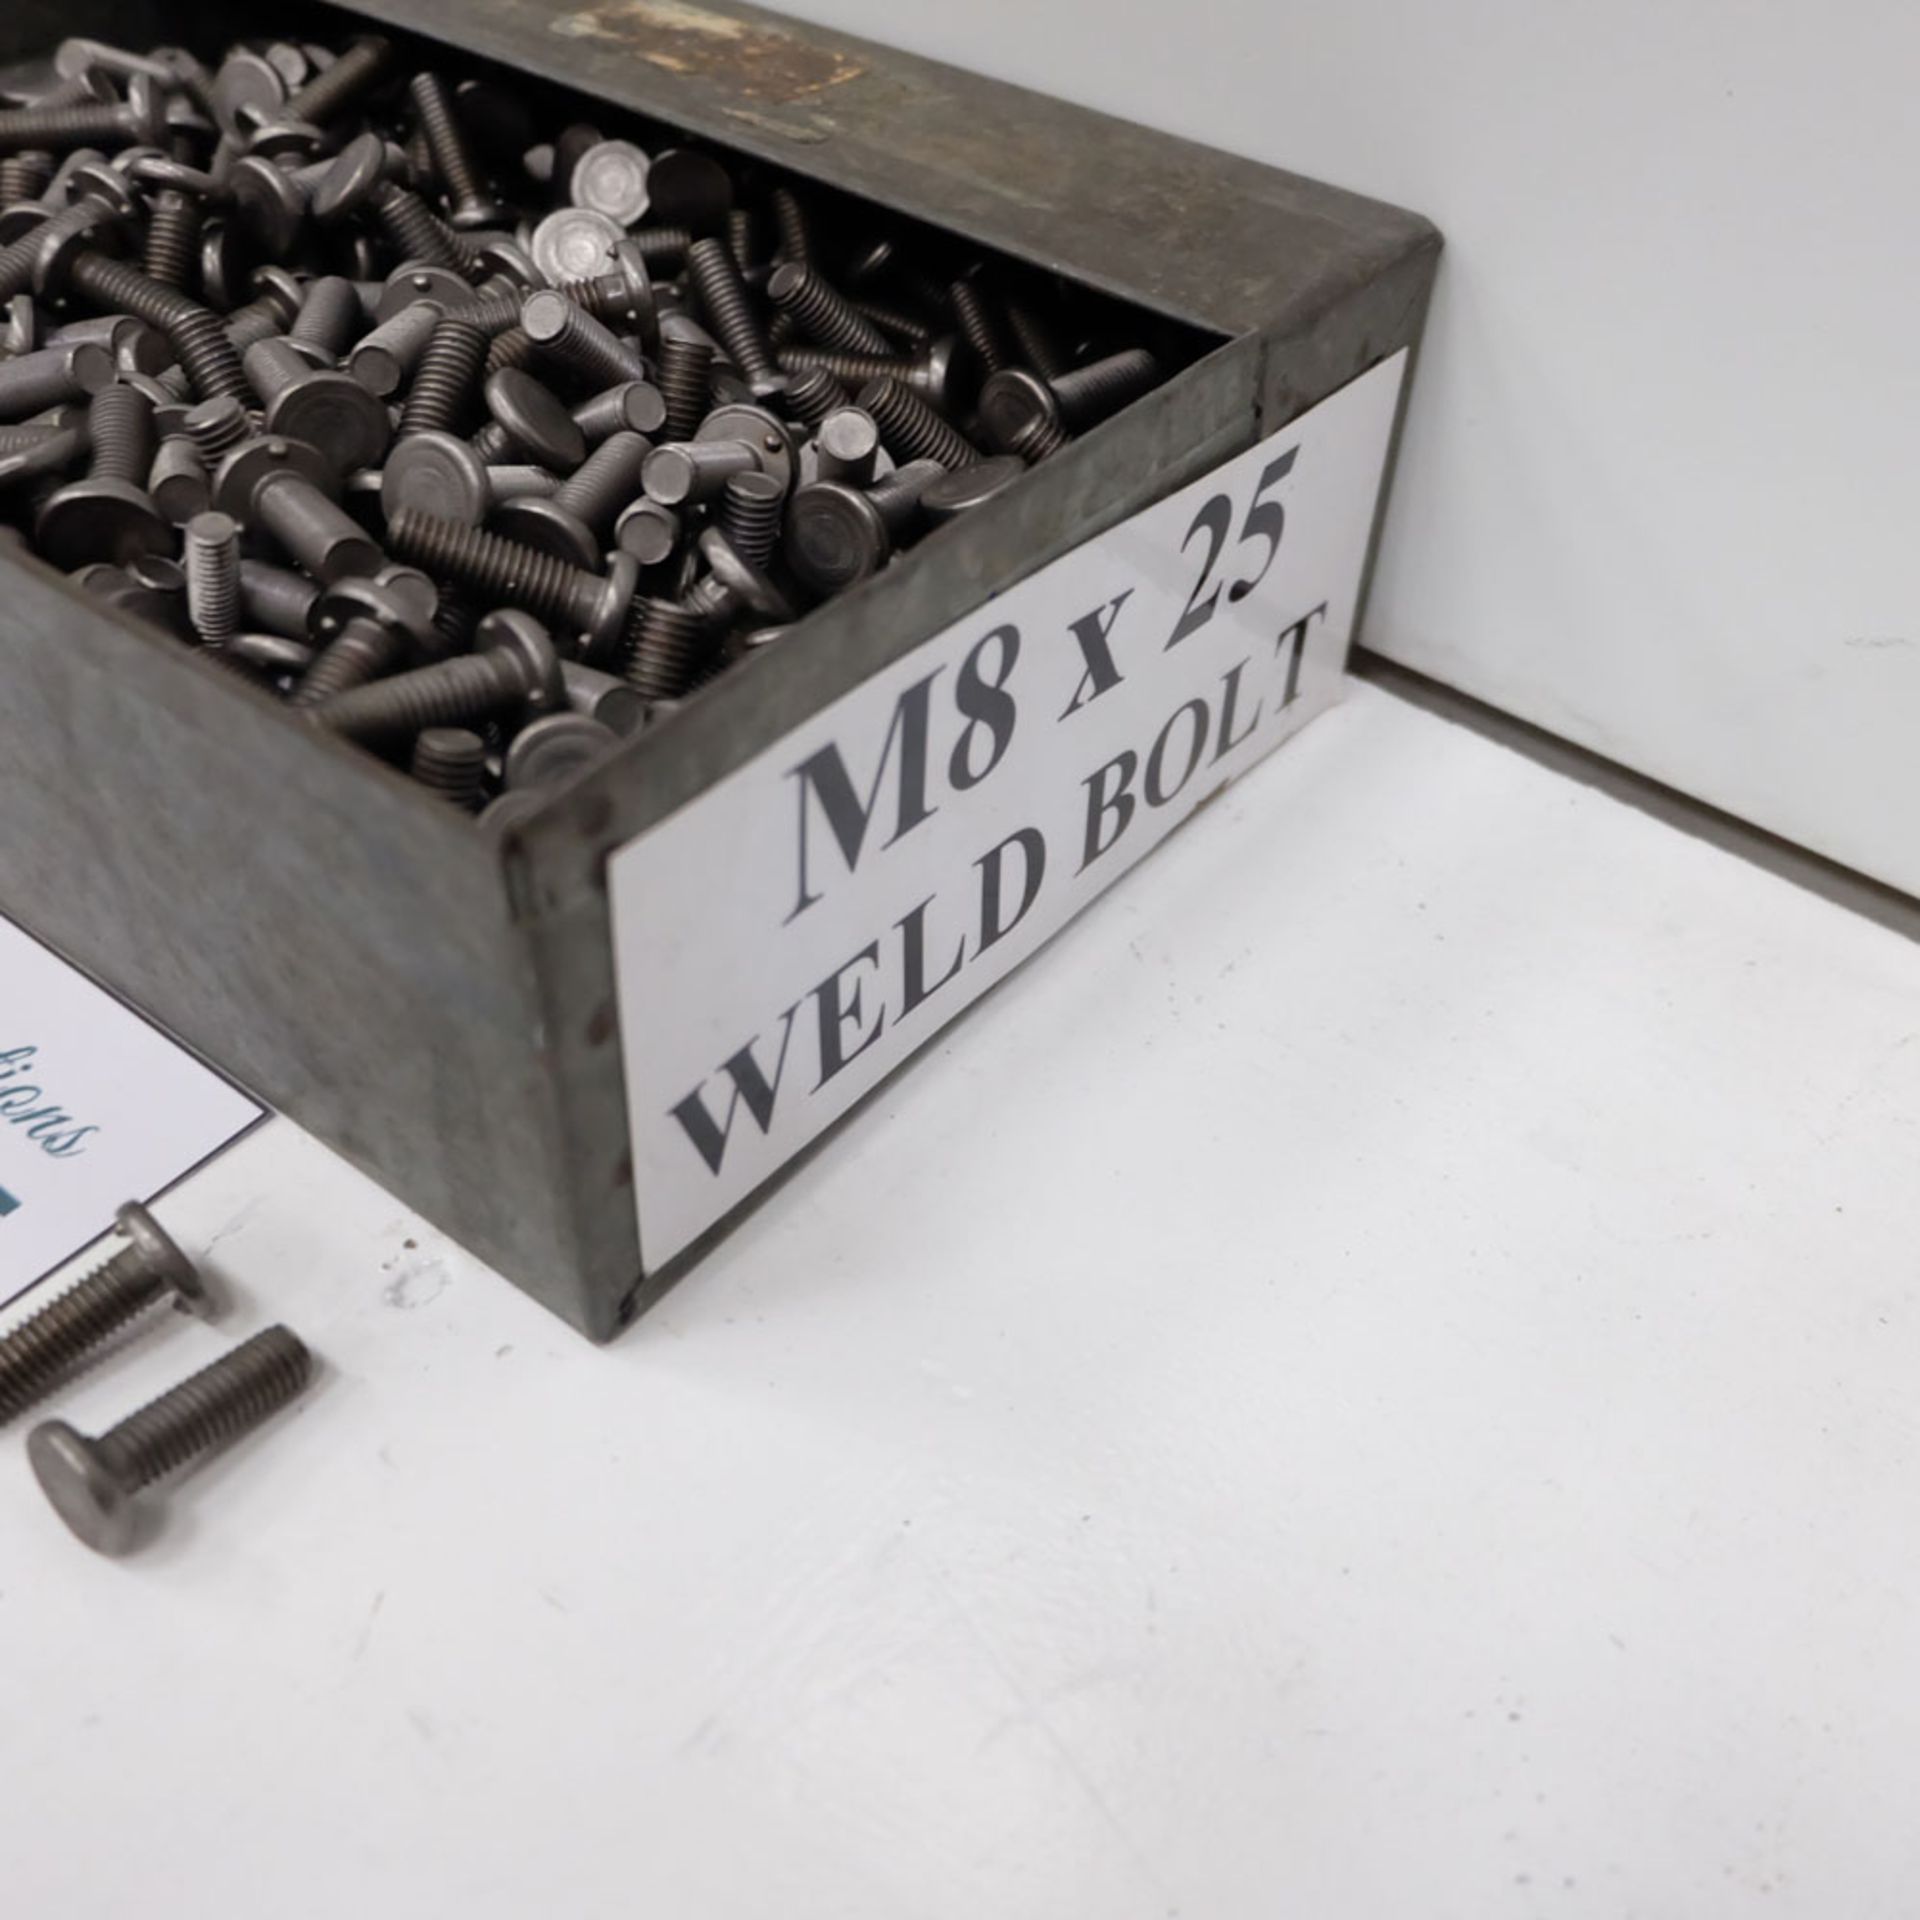 Quantity of Weld Bolts as Lotted. Labelled M8 x 25 Weld Bolt. - Image 4 of 4